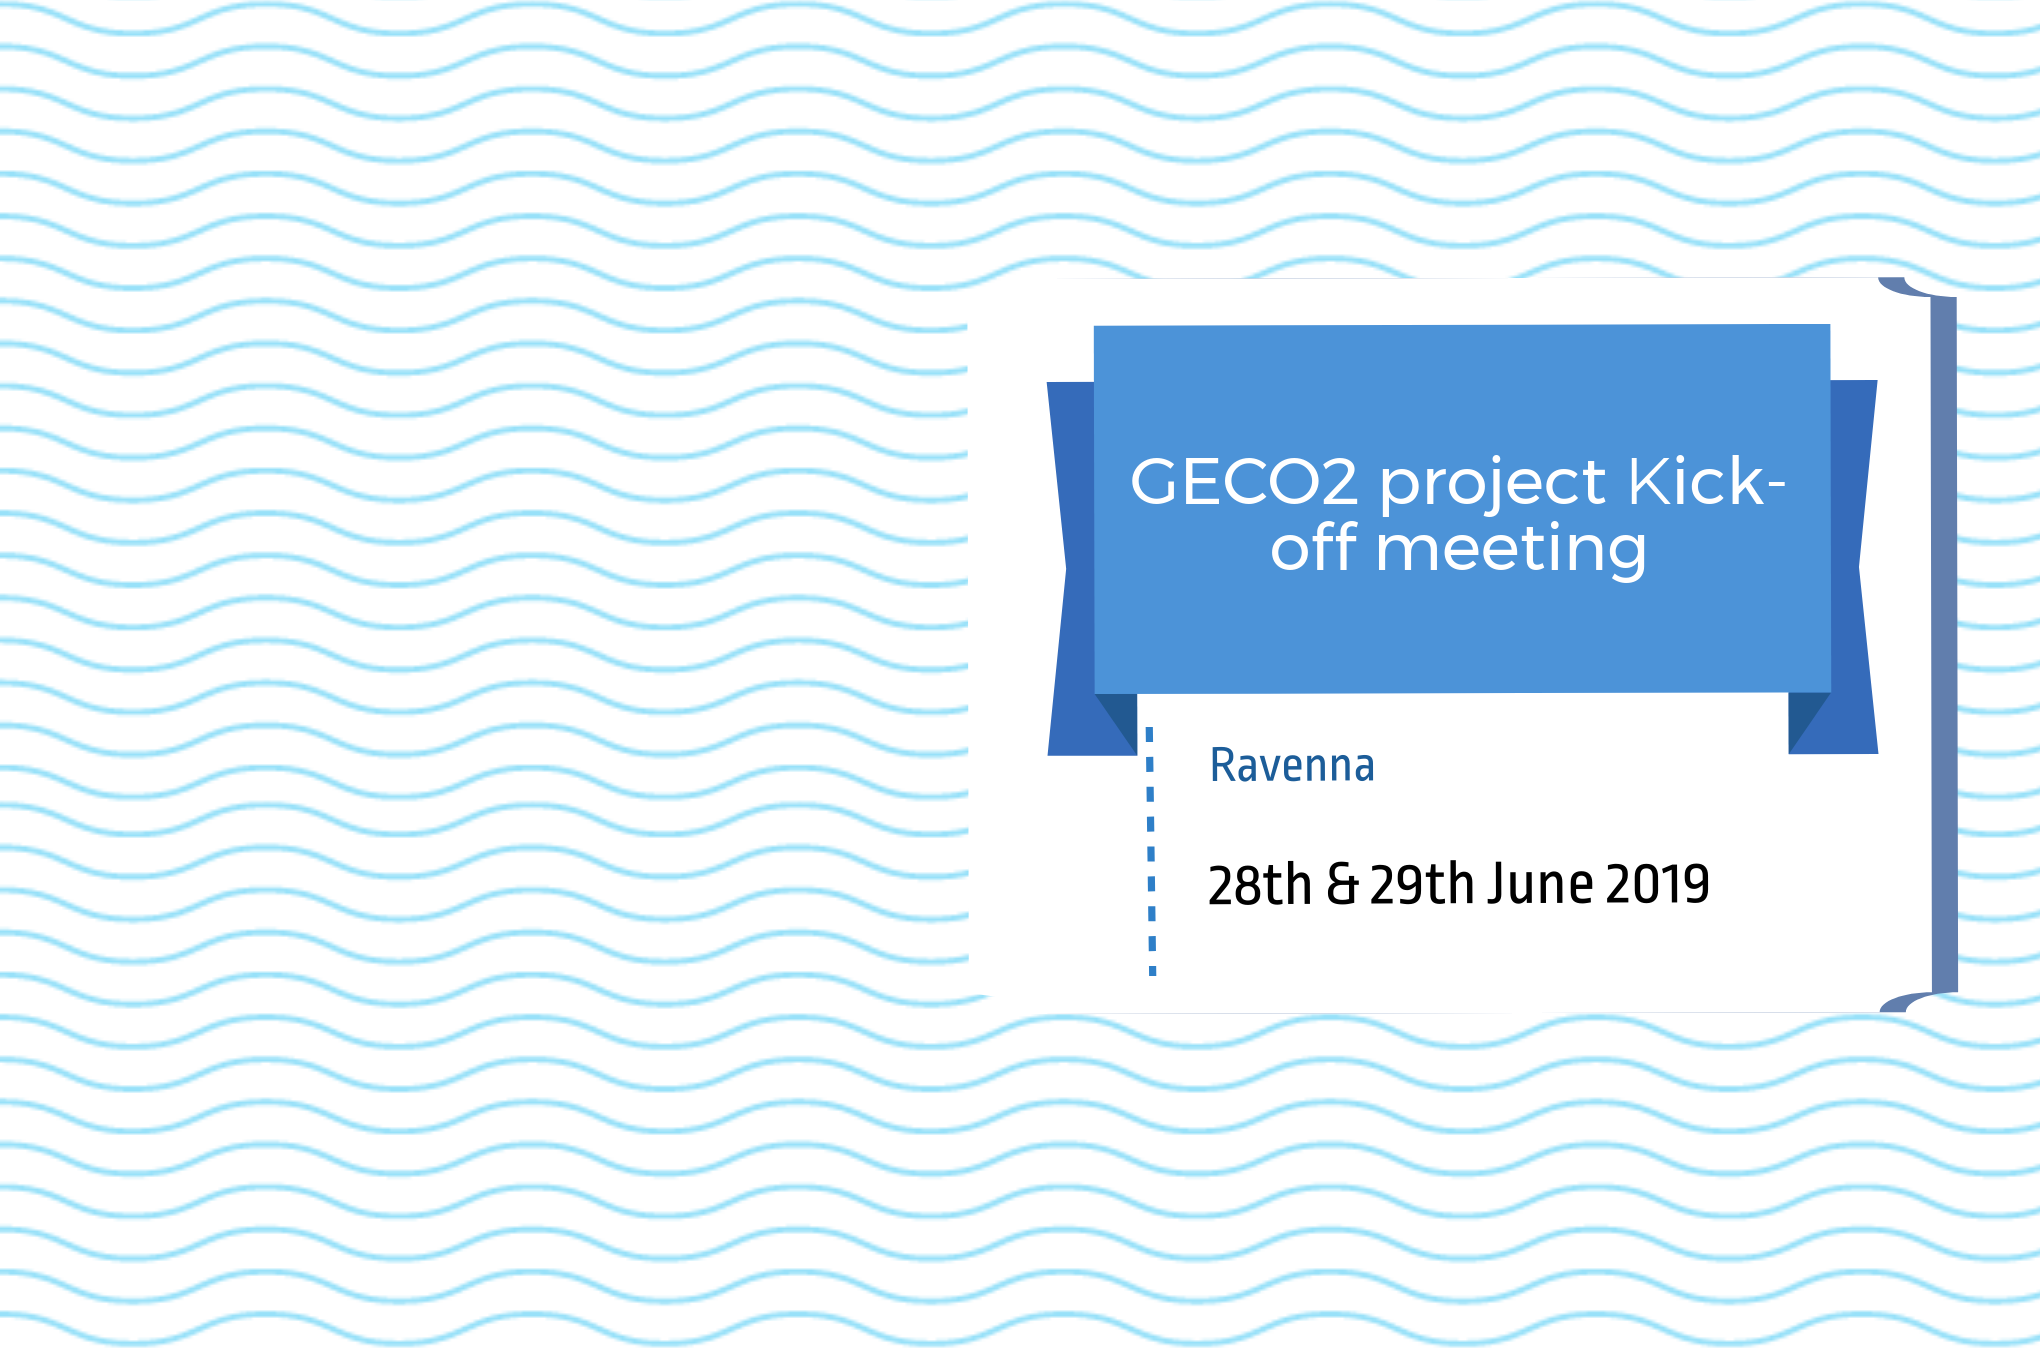 GECO2 project Kick-off meeting